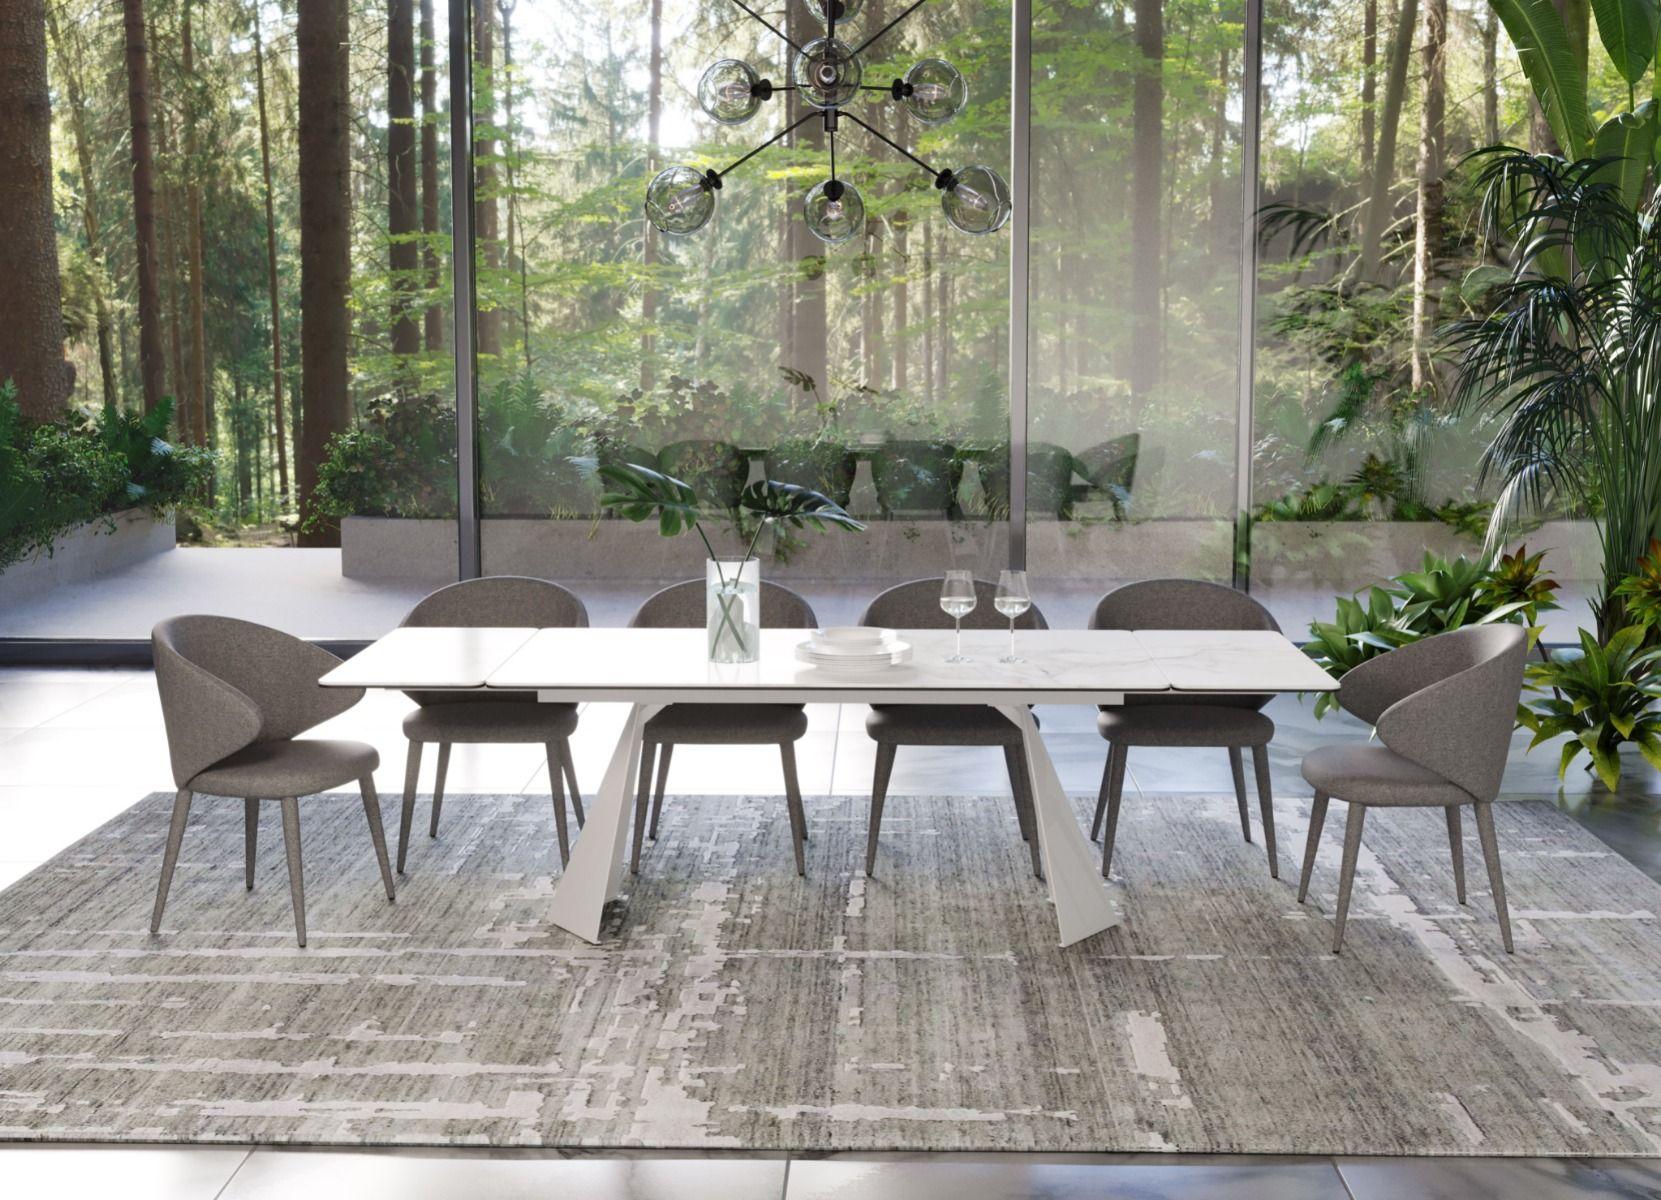 Contemporary, Modern Dining Room Set Encanto Keller VGNS8762-DT-11pcs in White, Gray Fabric